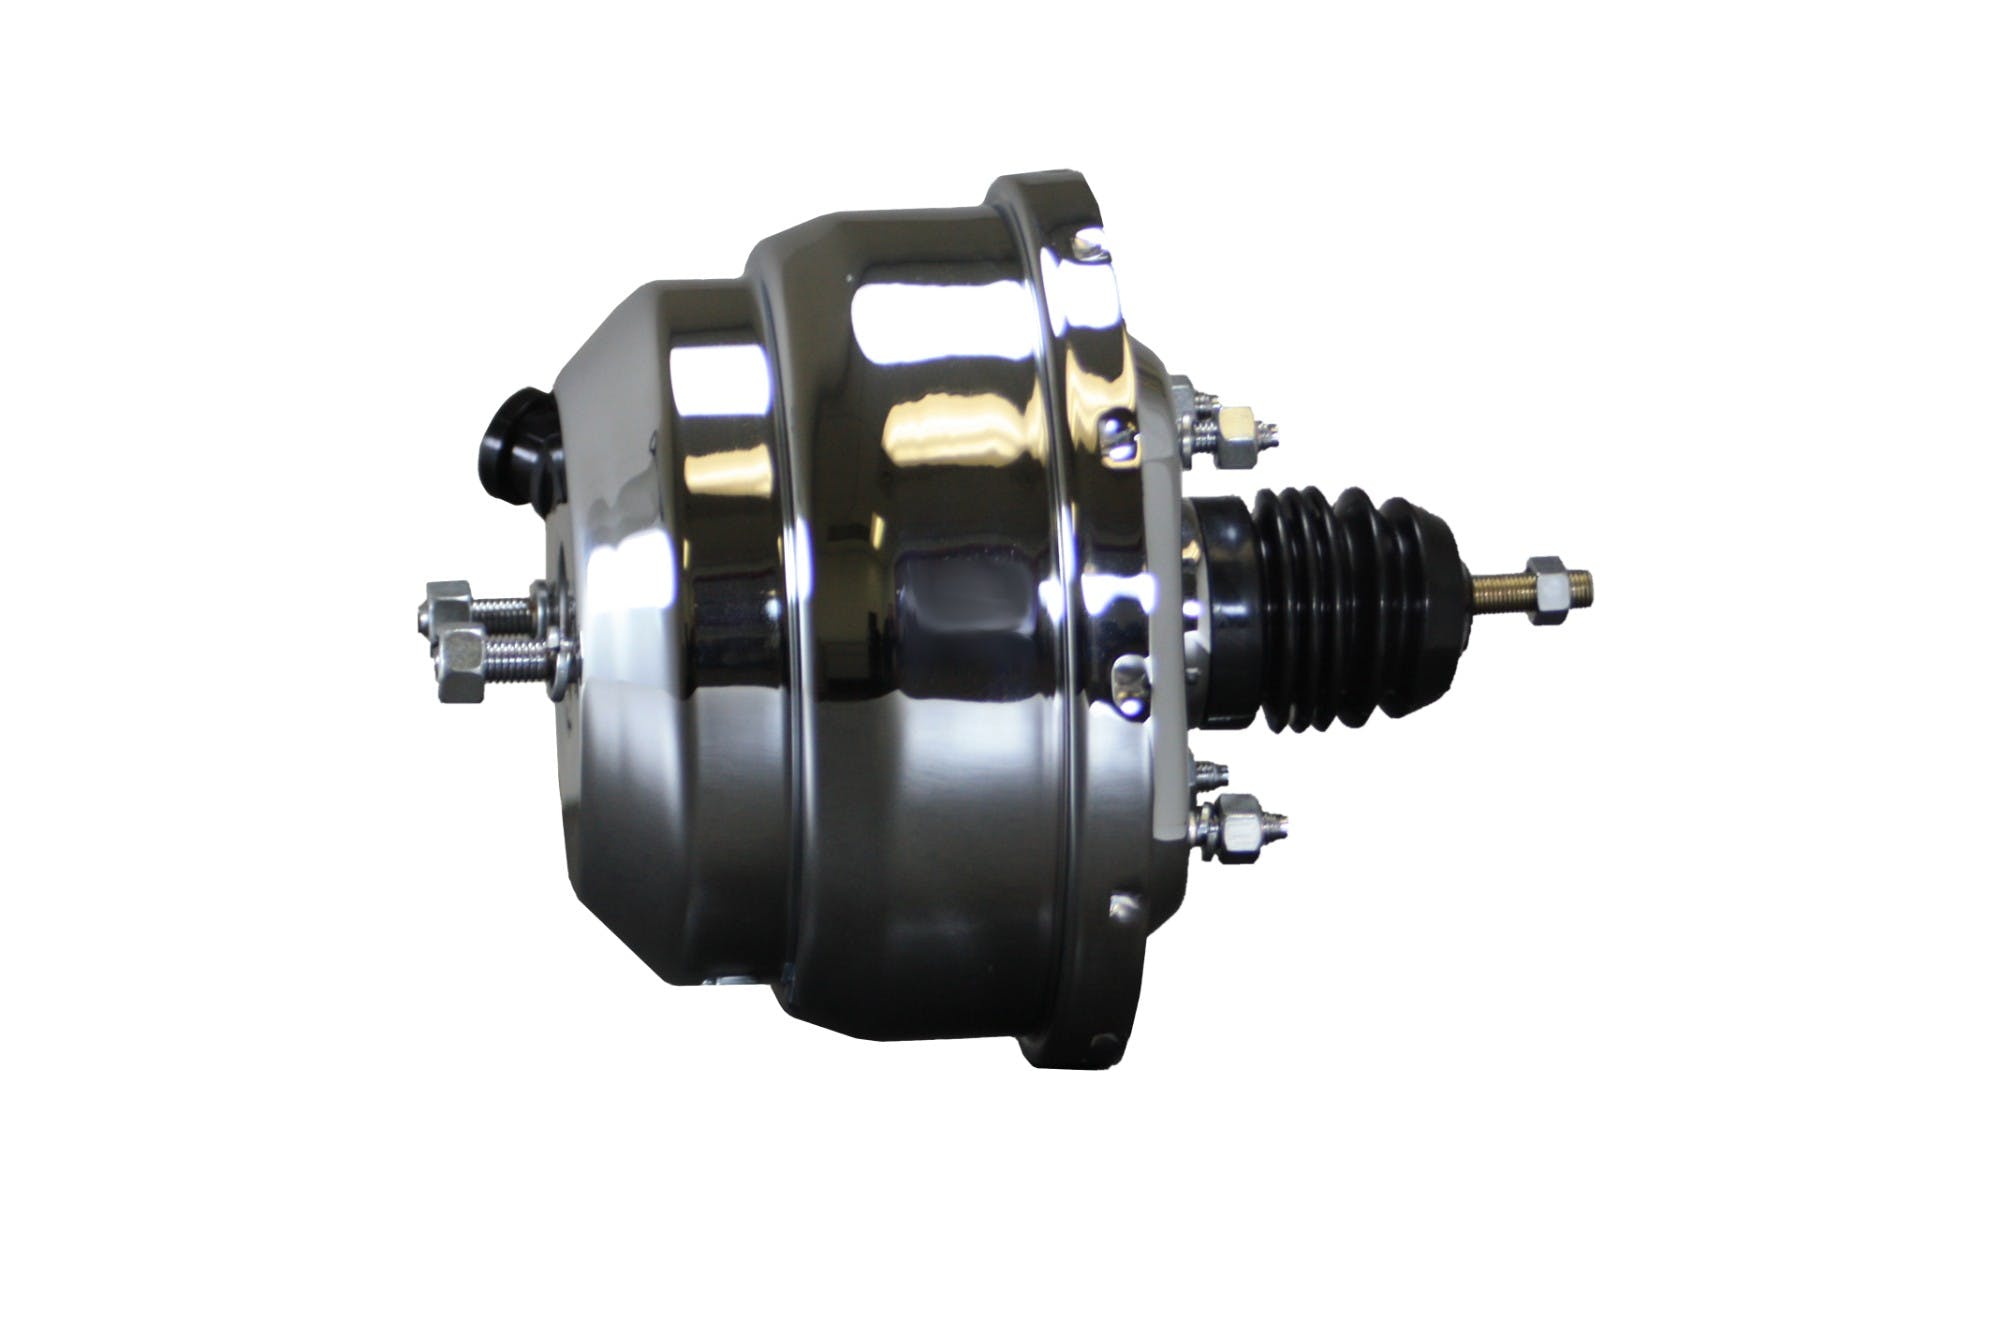 LEED Brakes PBKT1044 8 inch Dual Chrome Booster